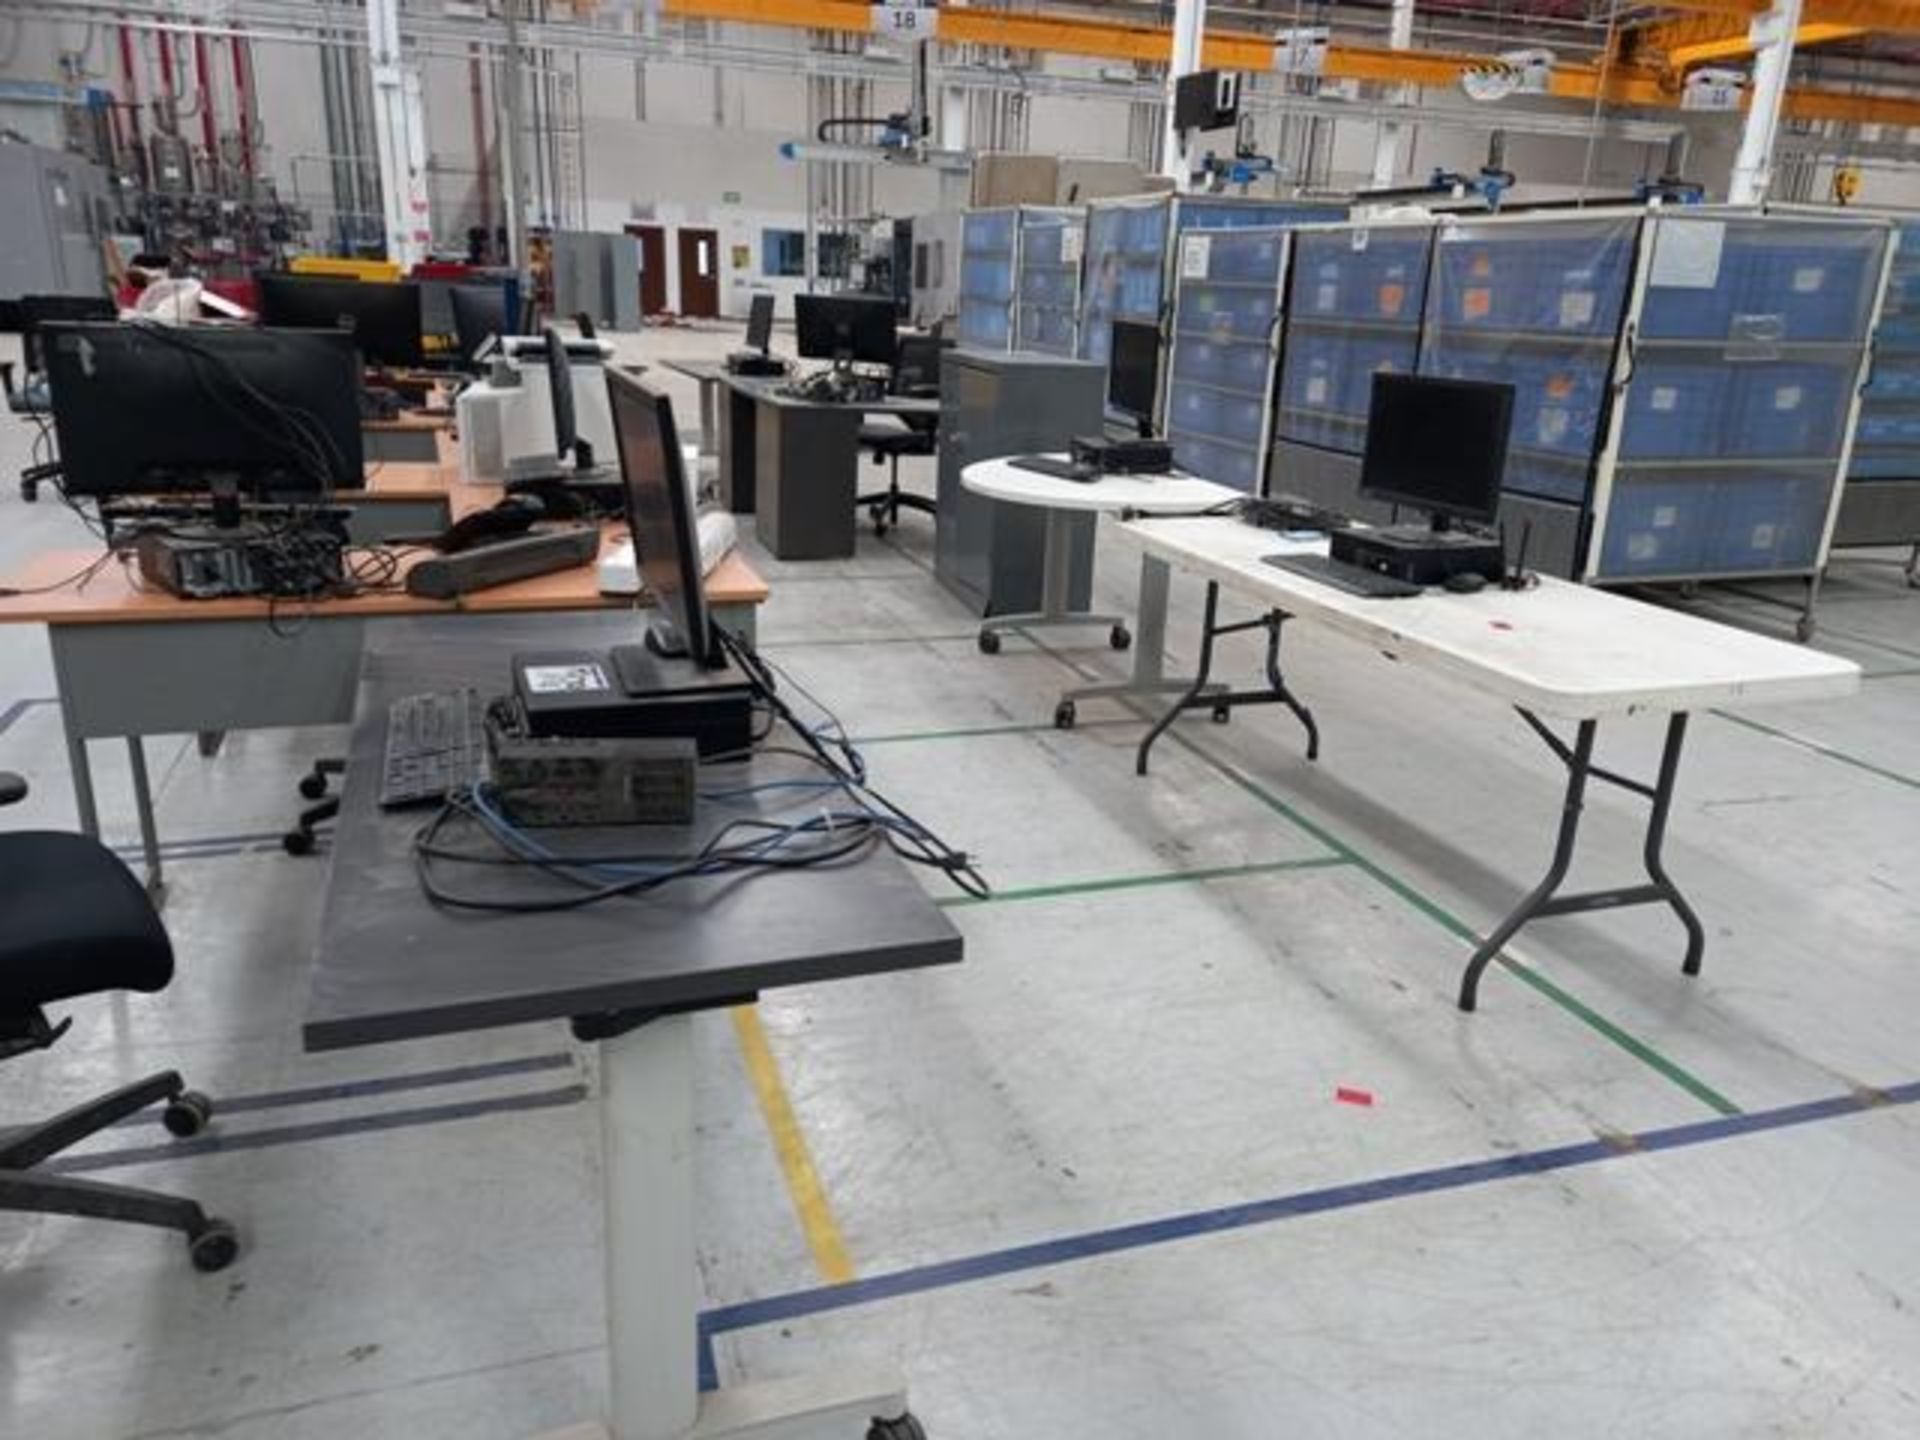 LOT: (66) Of Furniture and Computing Equipment Consisting of: Computers, Printers, Desks, Chairs, Dr - Image 26 of 38